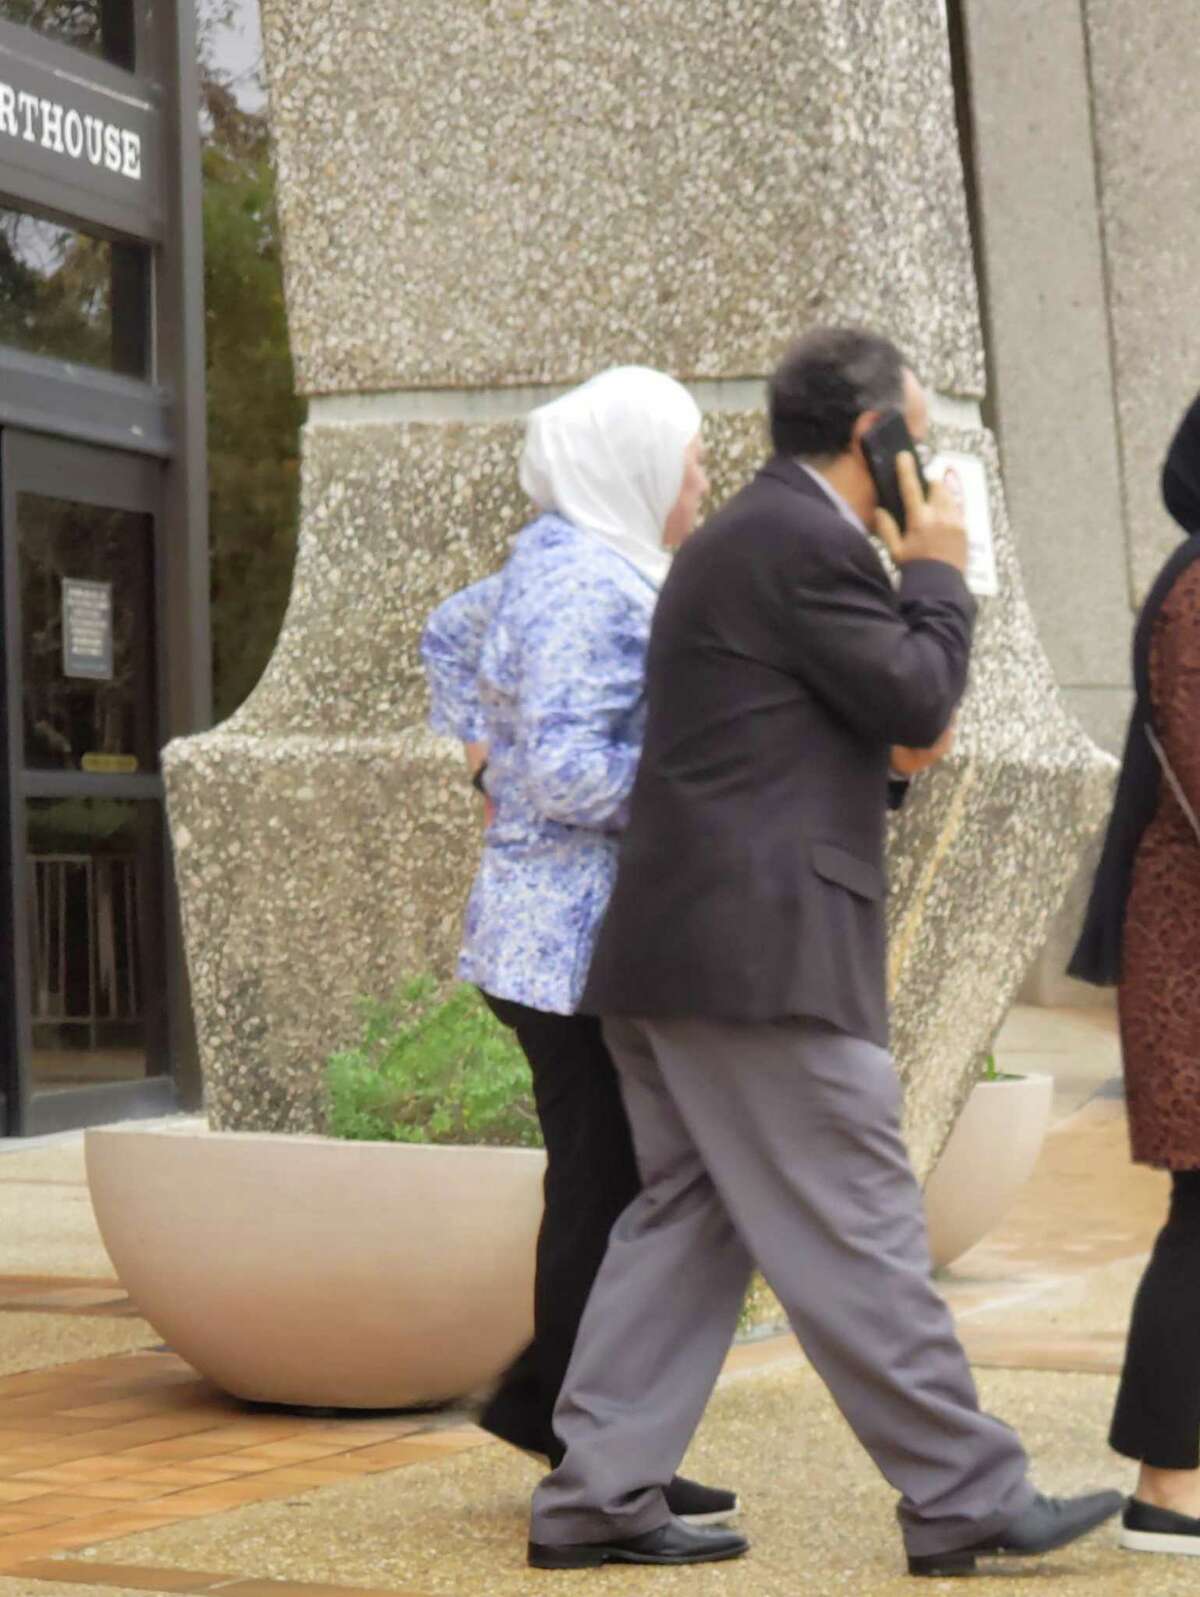 Imad Eddin Wadi, talking on the phone, leaves San Antonio’s federal courthouse Thursday after rejecting a plea offer in his terrorism case that would have capped any prison sentence he got at eight years. He’s accused of assisting jihad fighters in Syria and faces up to life in prison.